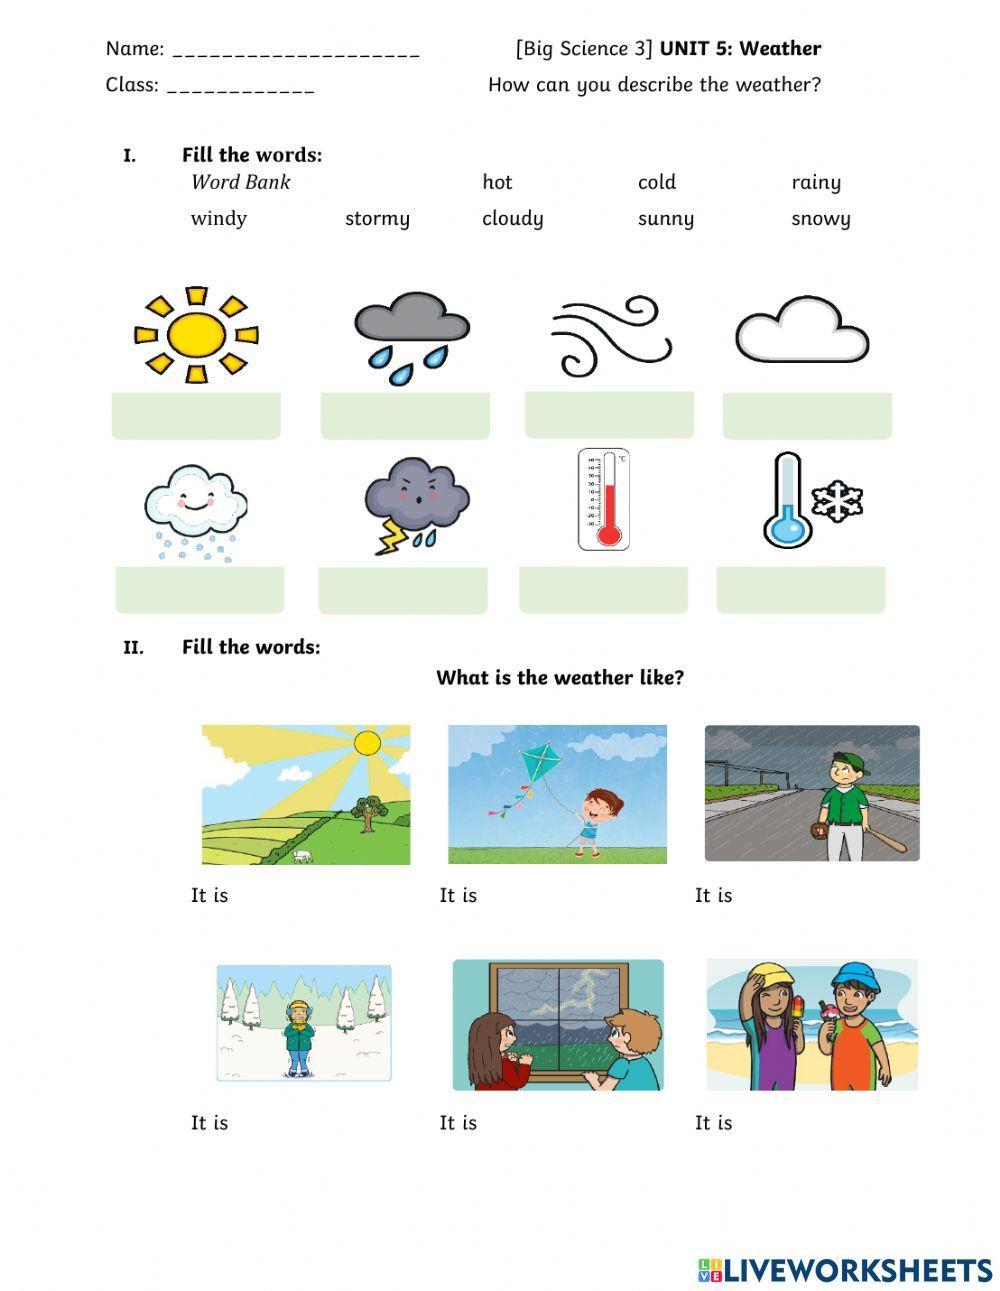 Big Science 3 How can you describe the weather?